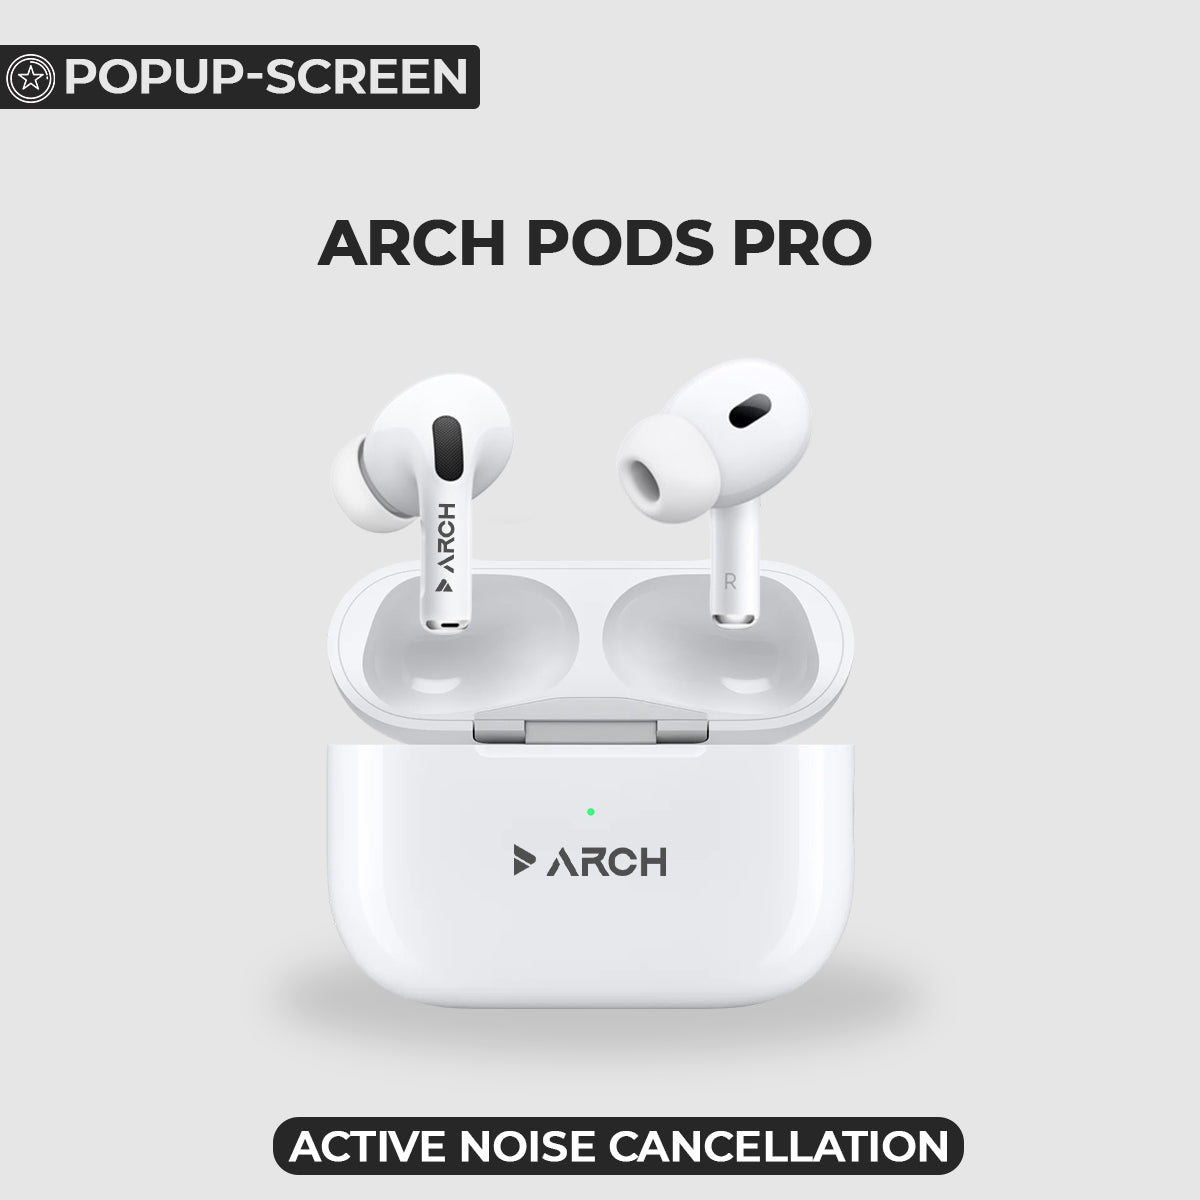 ARCH Pods Pro